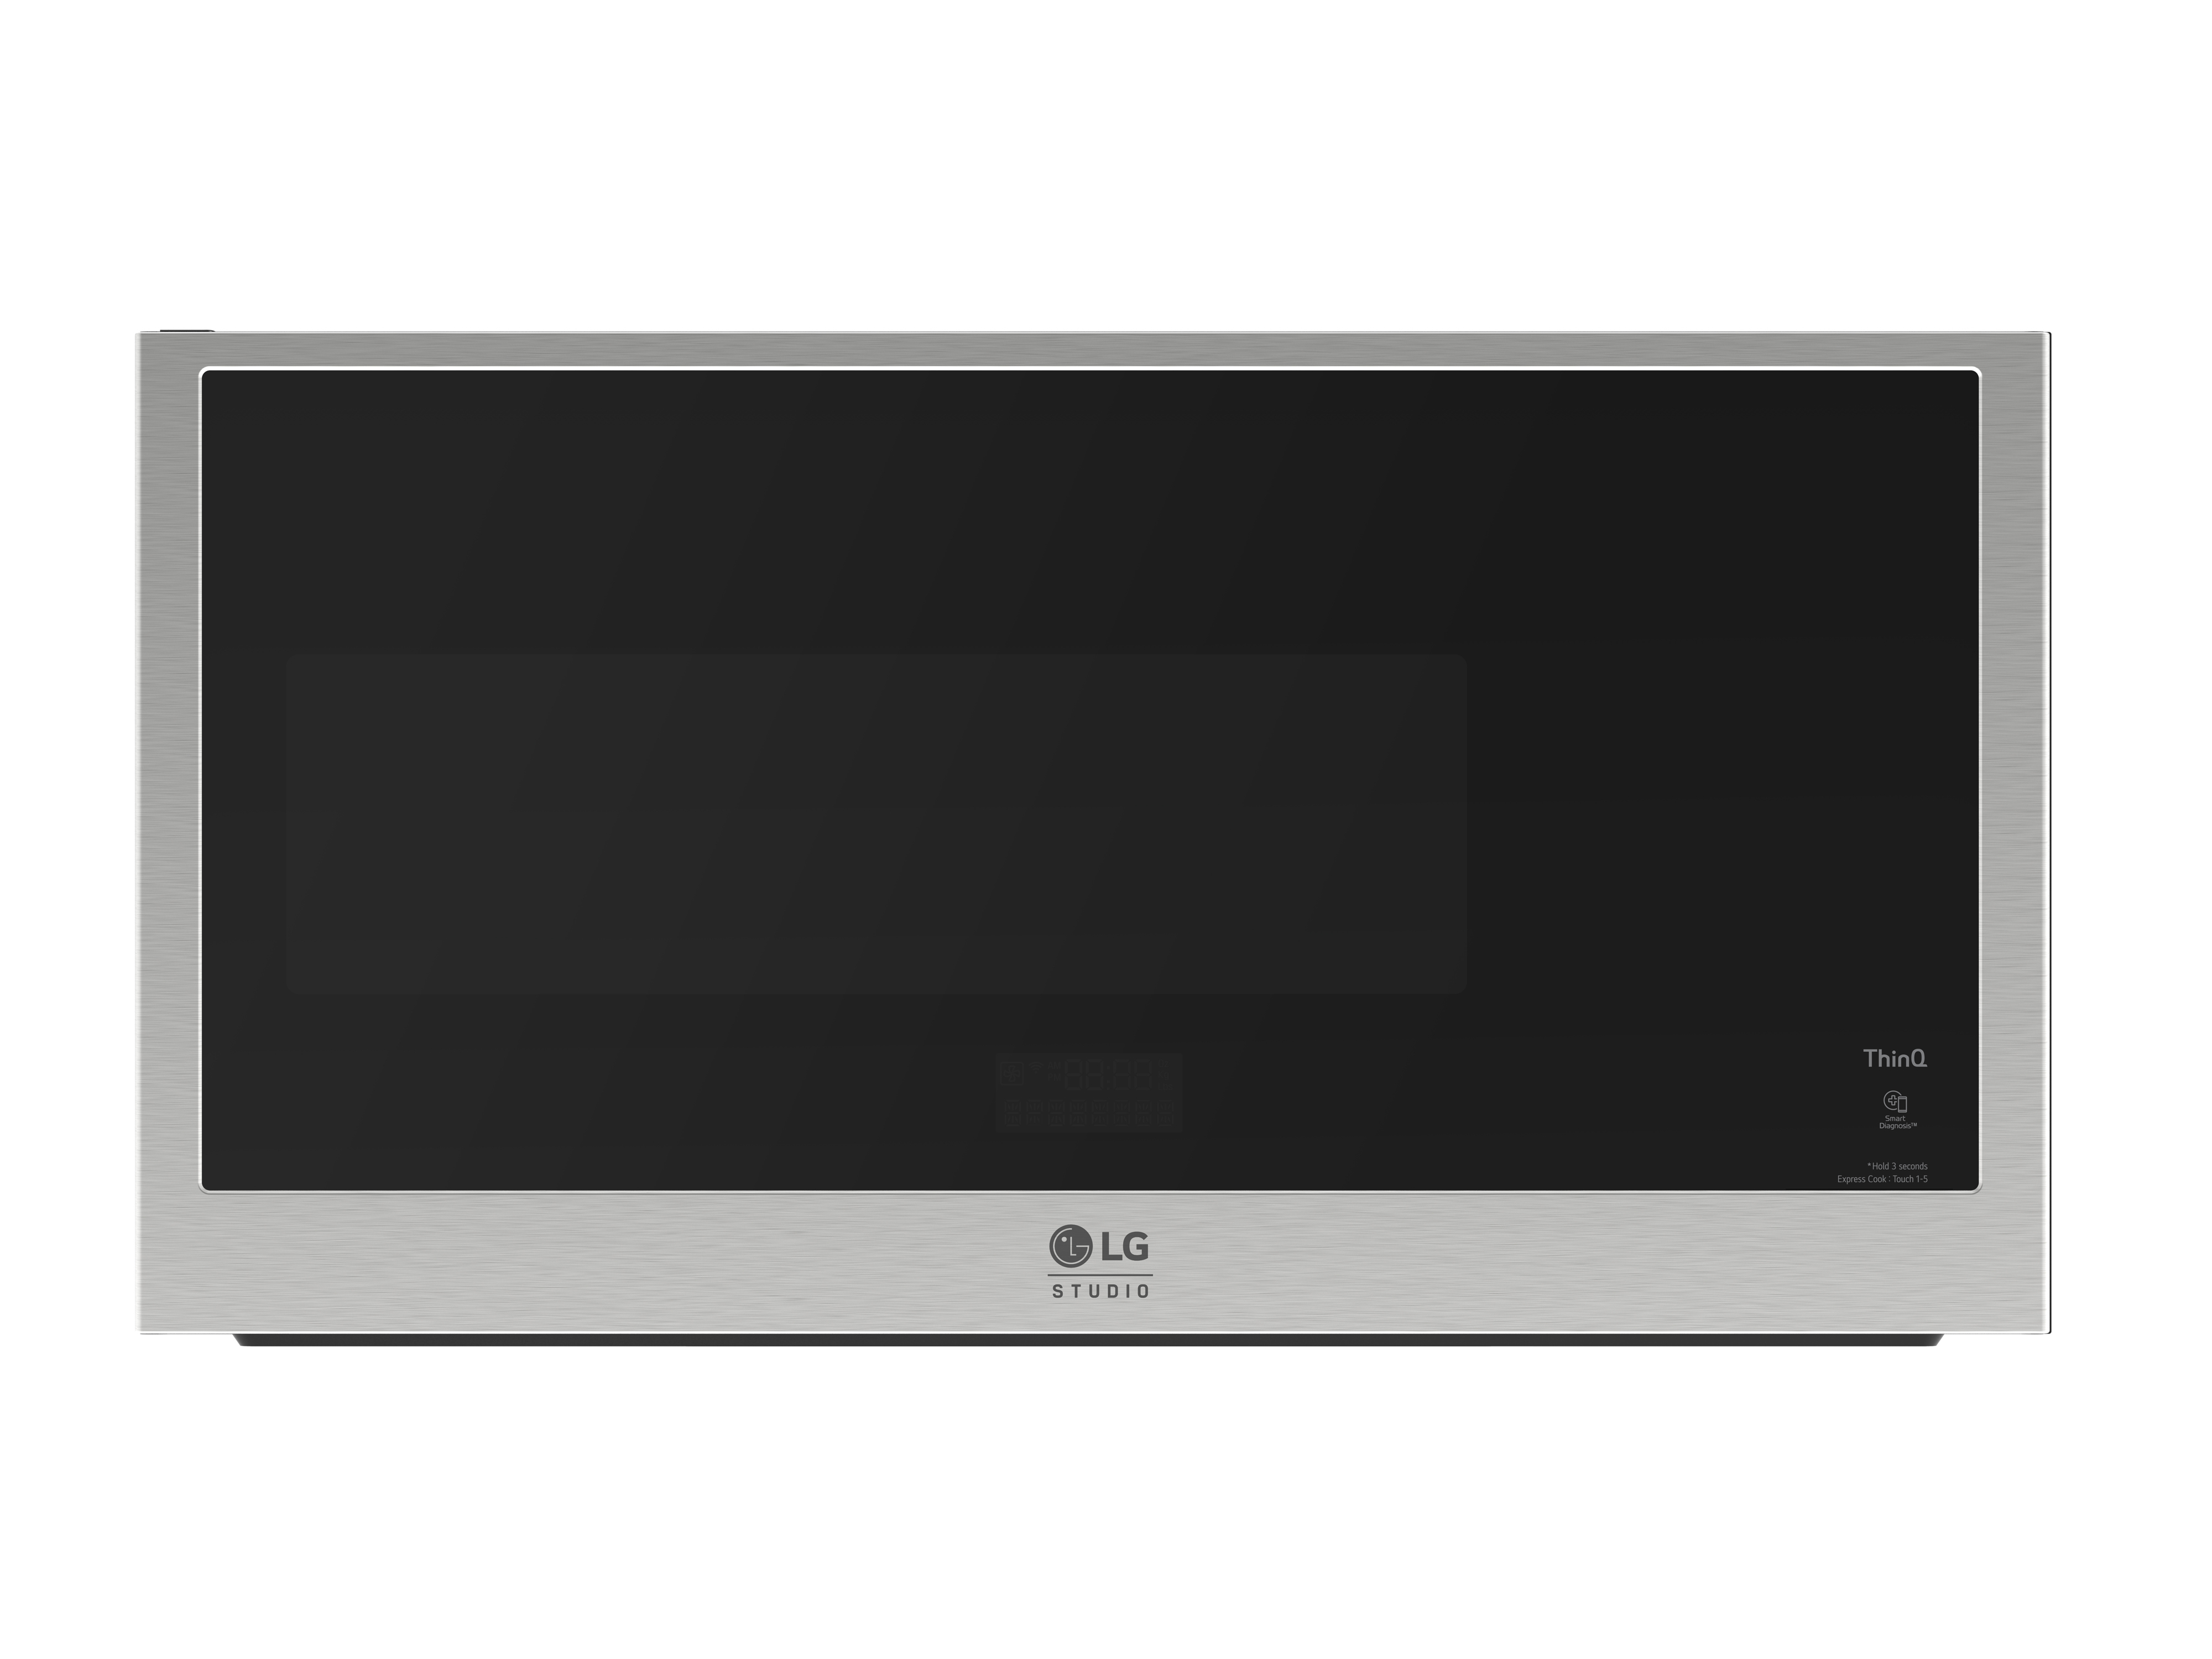 LG STUDIO Convection OTR with Air Fry